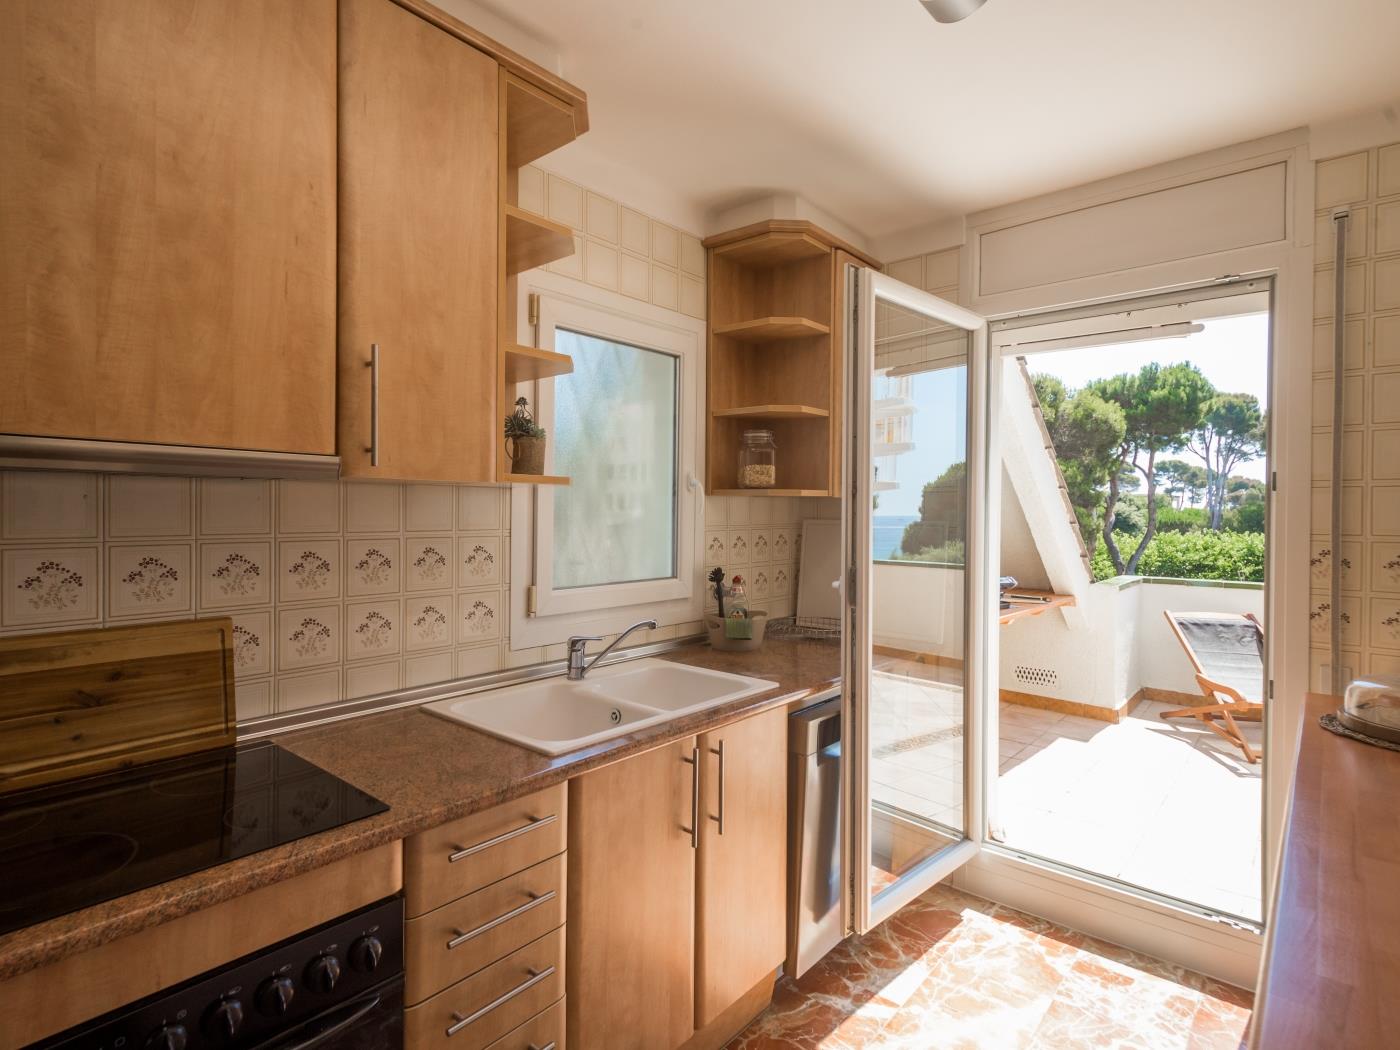 Apto Cala Cristus with sea views just 2 minutes walk from the beach in Calonge